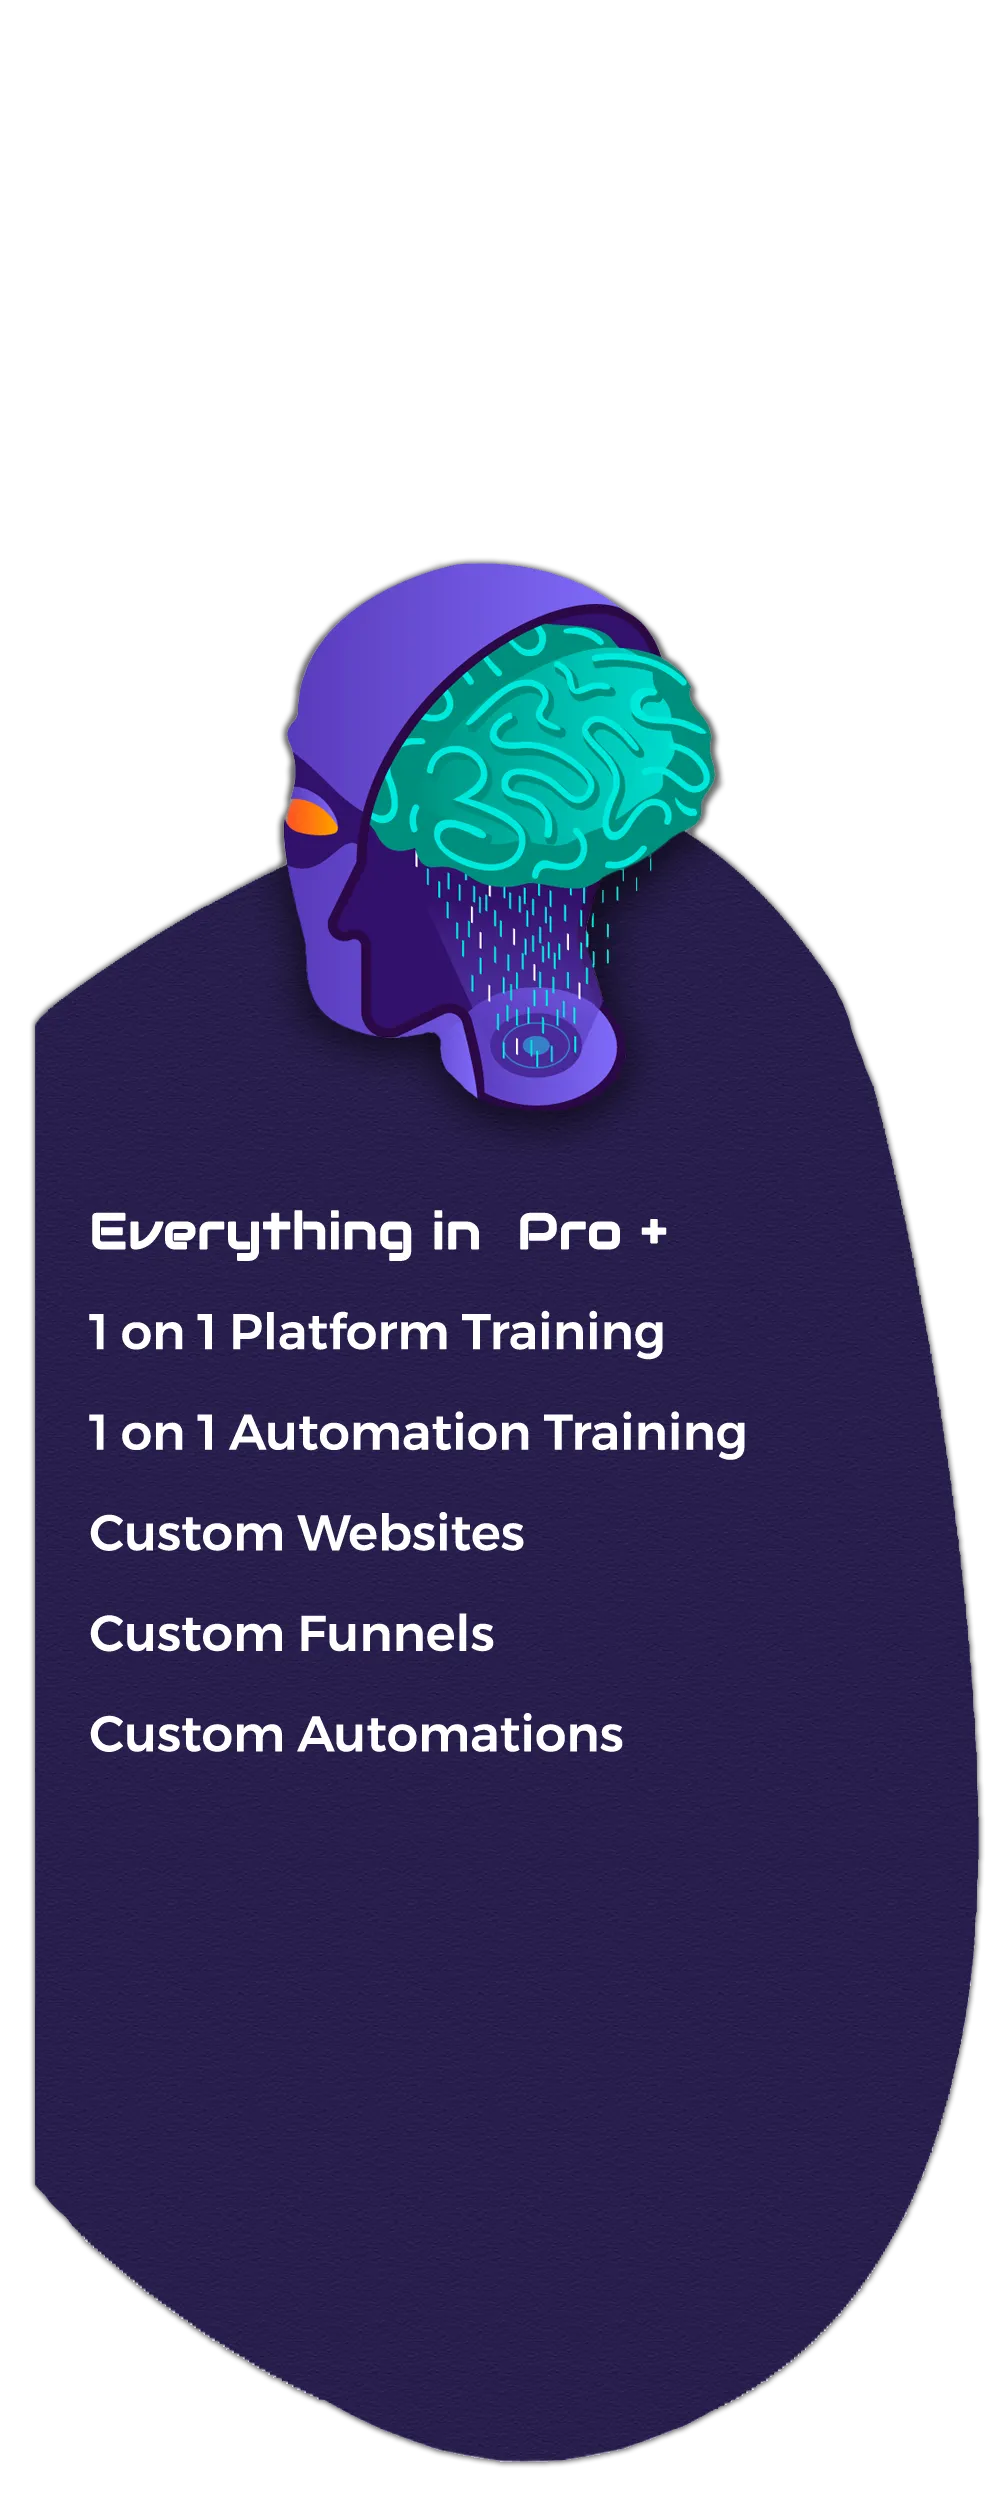 Enterprise Plan - Everything in Pro, 1 on 1 Platform Training, 1 on 1 Automation Training, Custom Websites, Custom Funnels, Custom Automations - Request A Quote